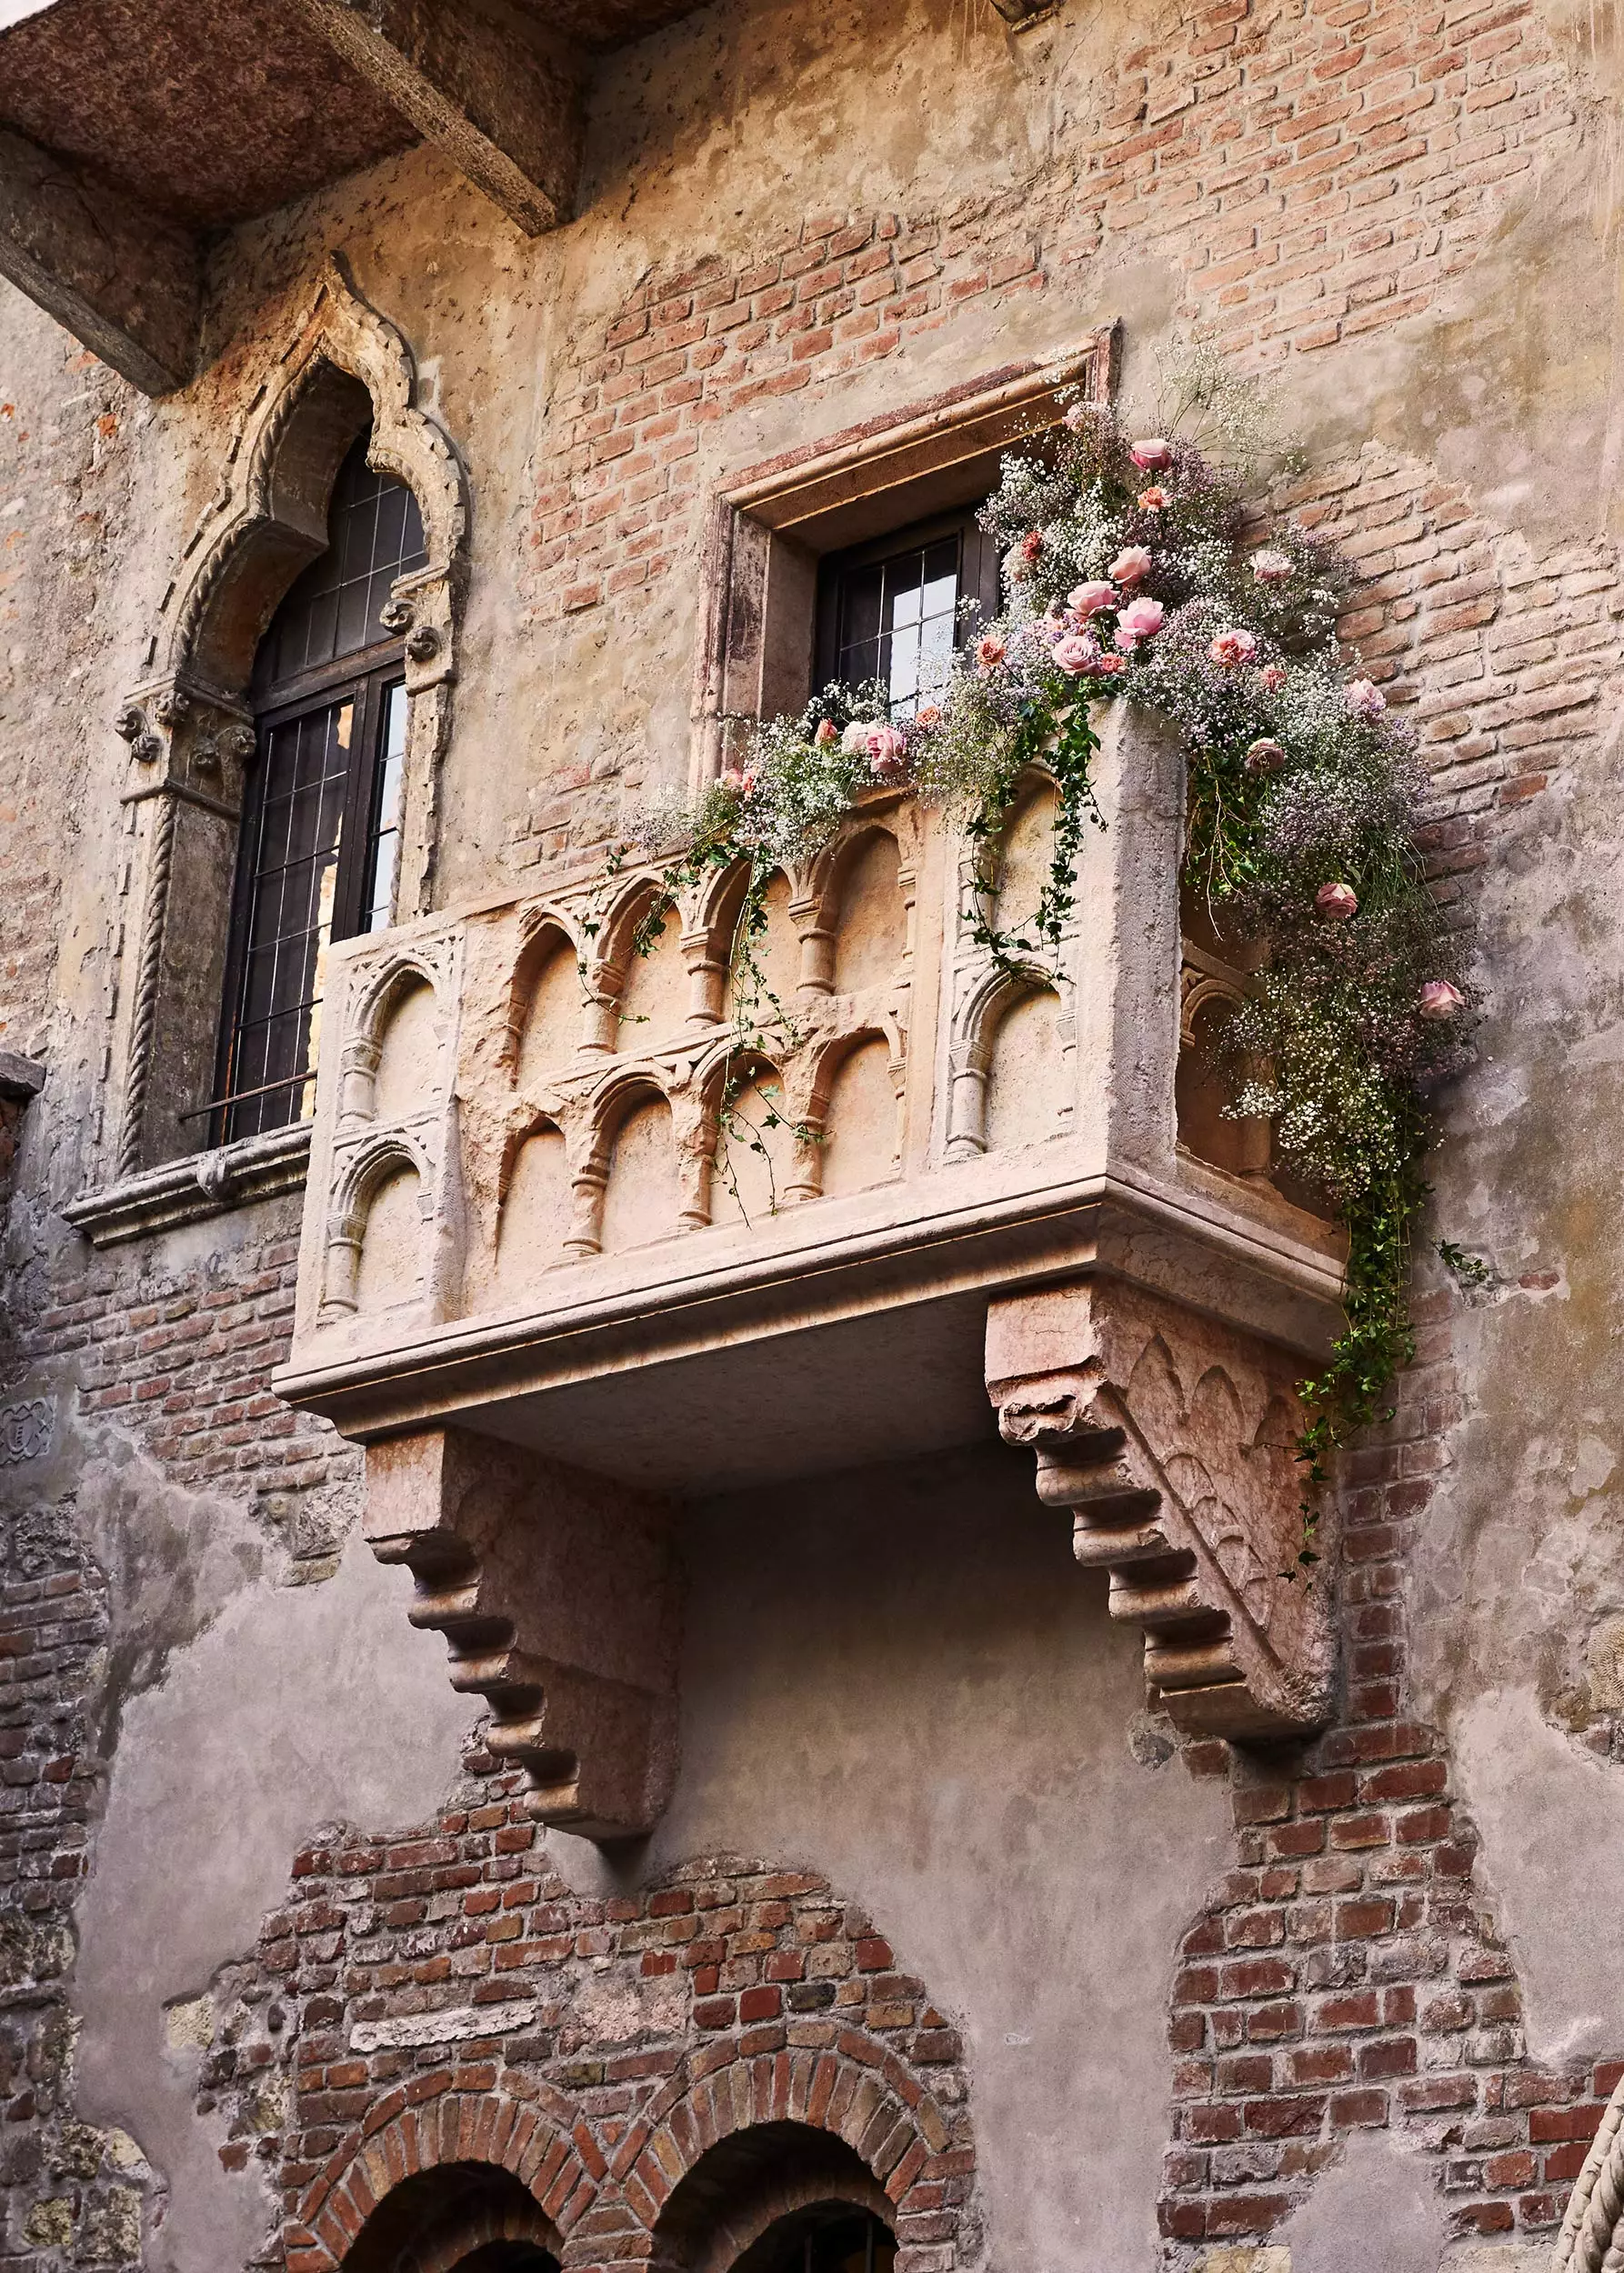 The property's beautiful stone balcony has made it a symbol of Shakespeare's iconic love story 'Romeo & Juliet' (